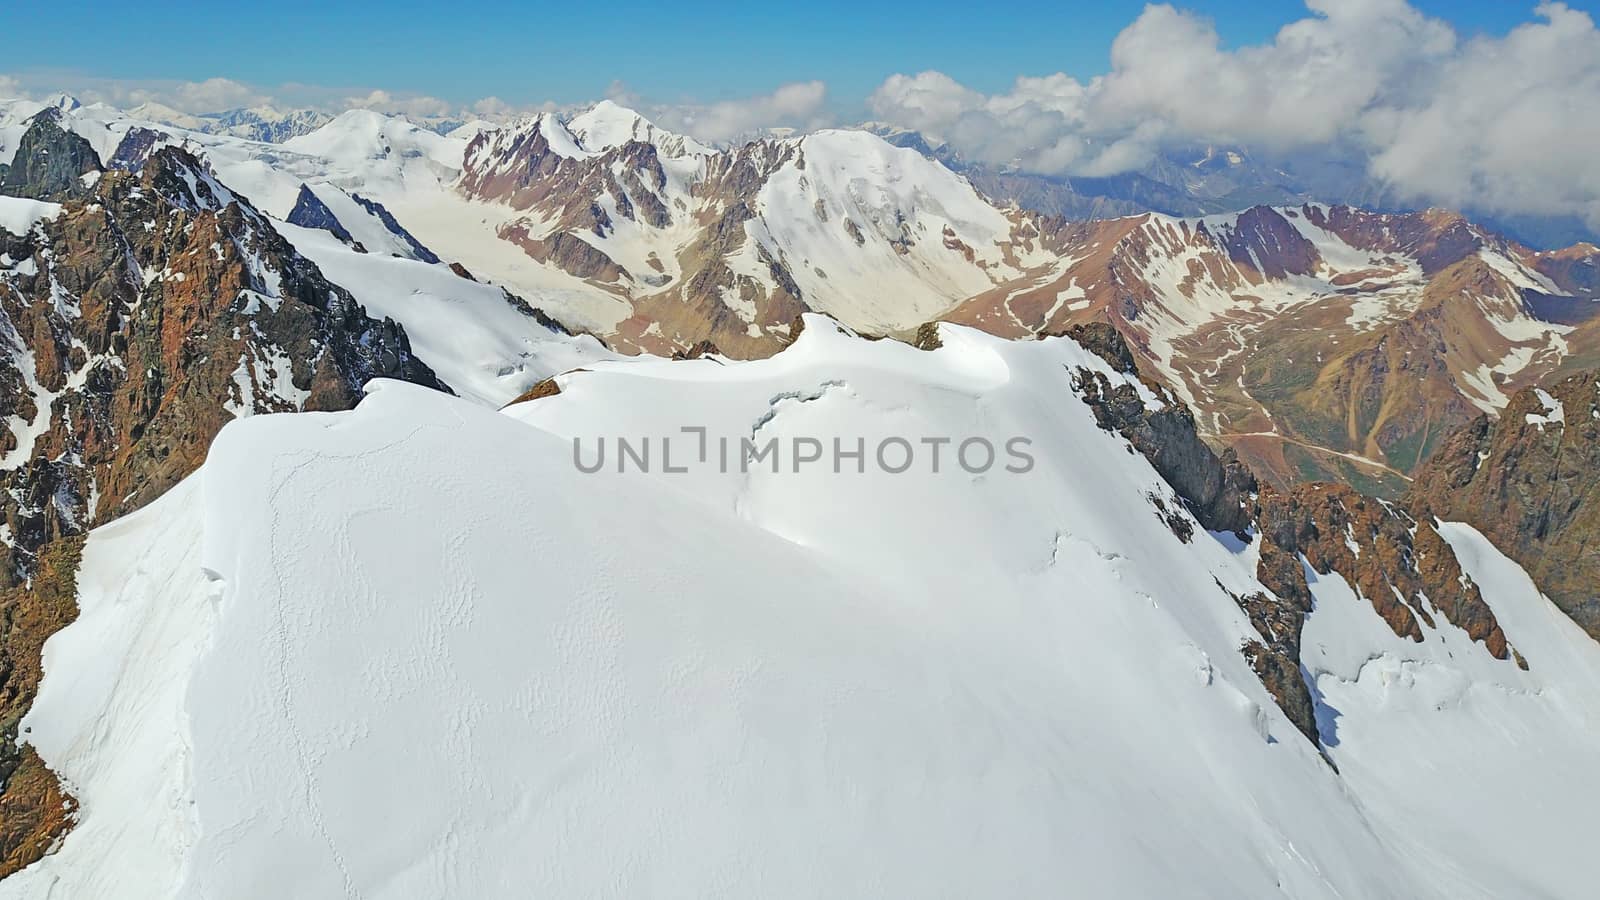 Huge snow mountains. View from the top of the drone. In places, you can see small people climbing to the top. Panorama of steep peaks and rocks, snow cornices. Mountaineering class. Extreme rest.